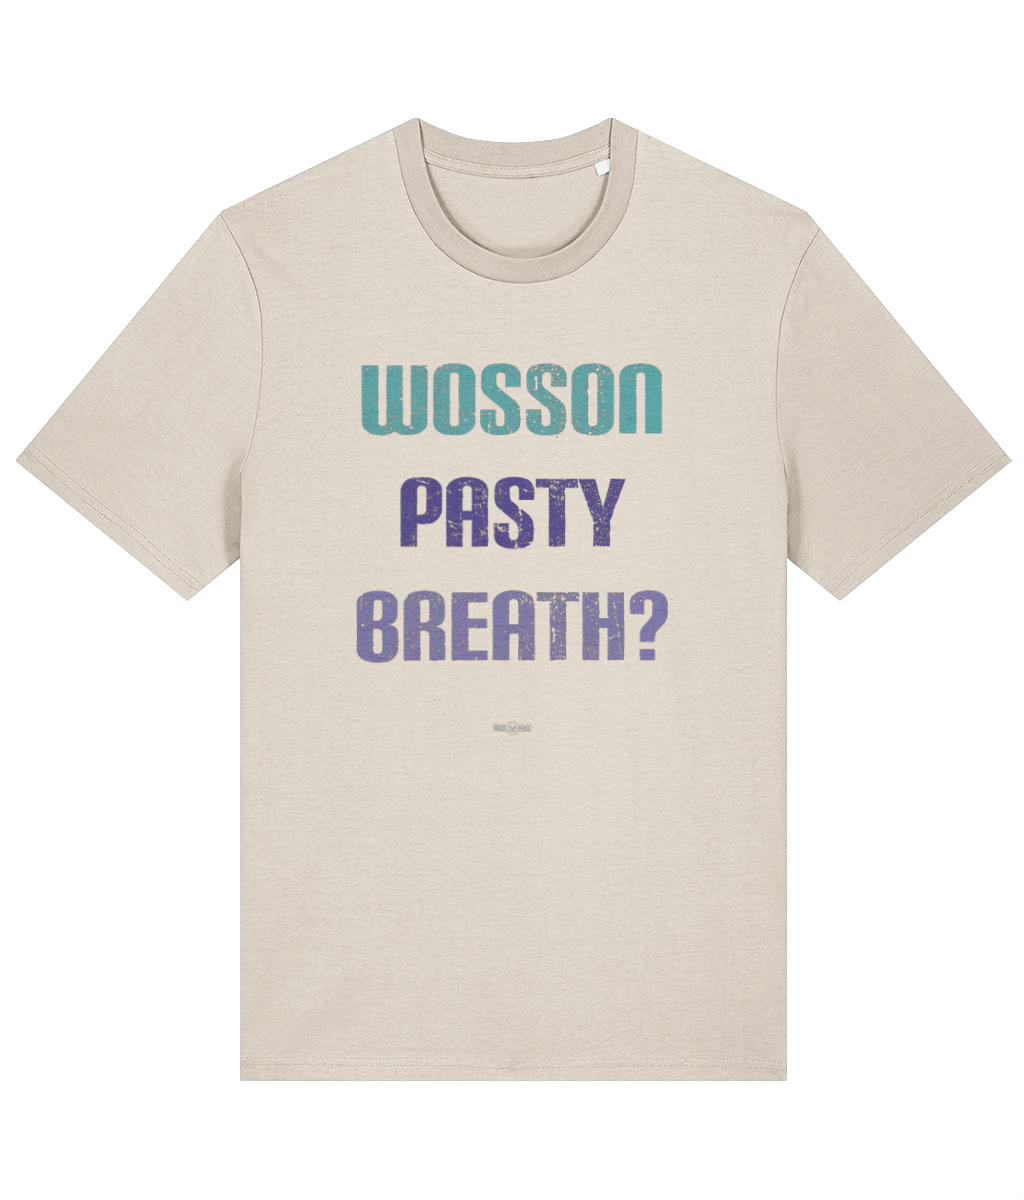 Wosson Pasty Breath? - TussFace T-shirt